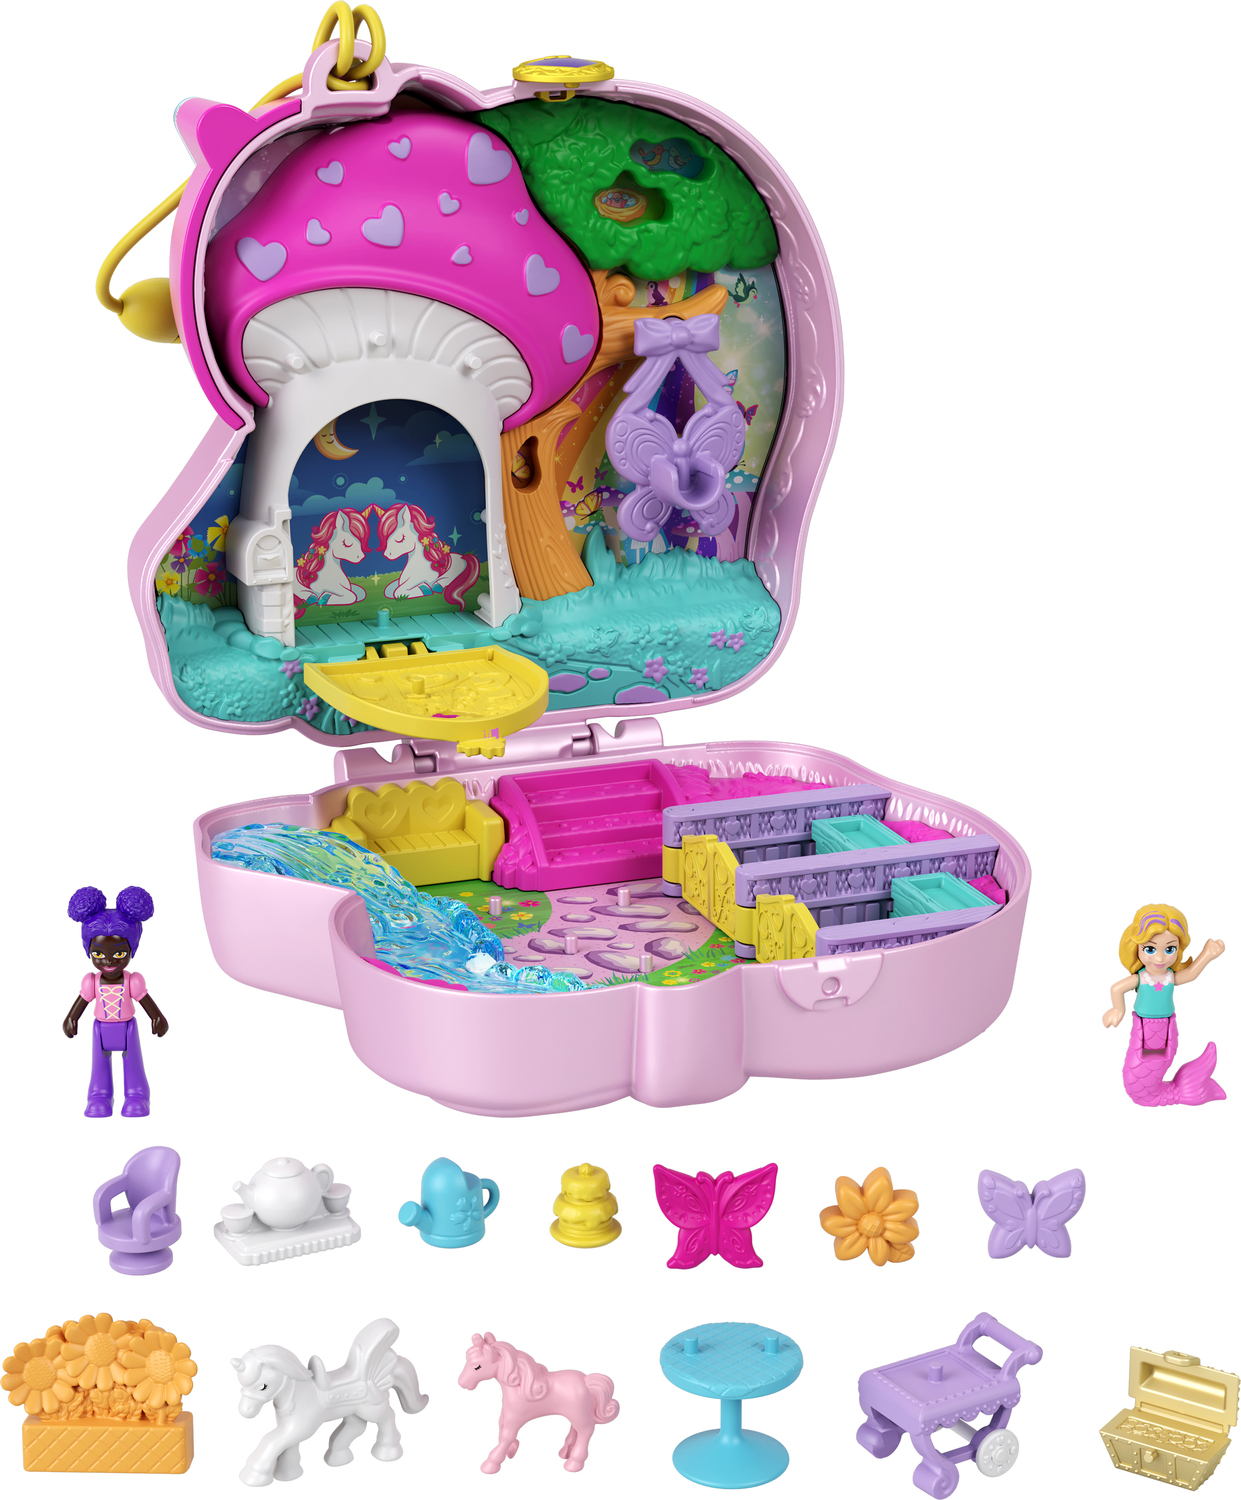 Polly Pocket Unicorn Forest Compact